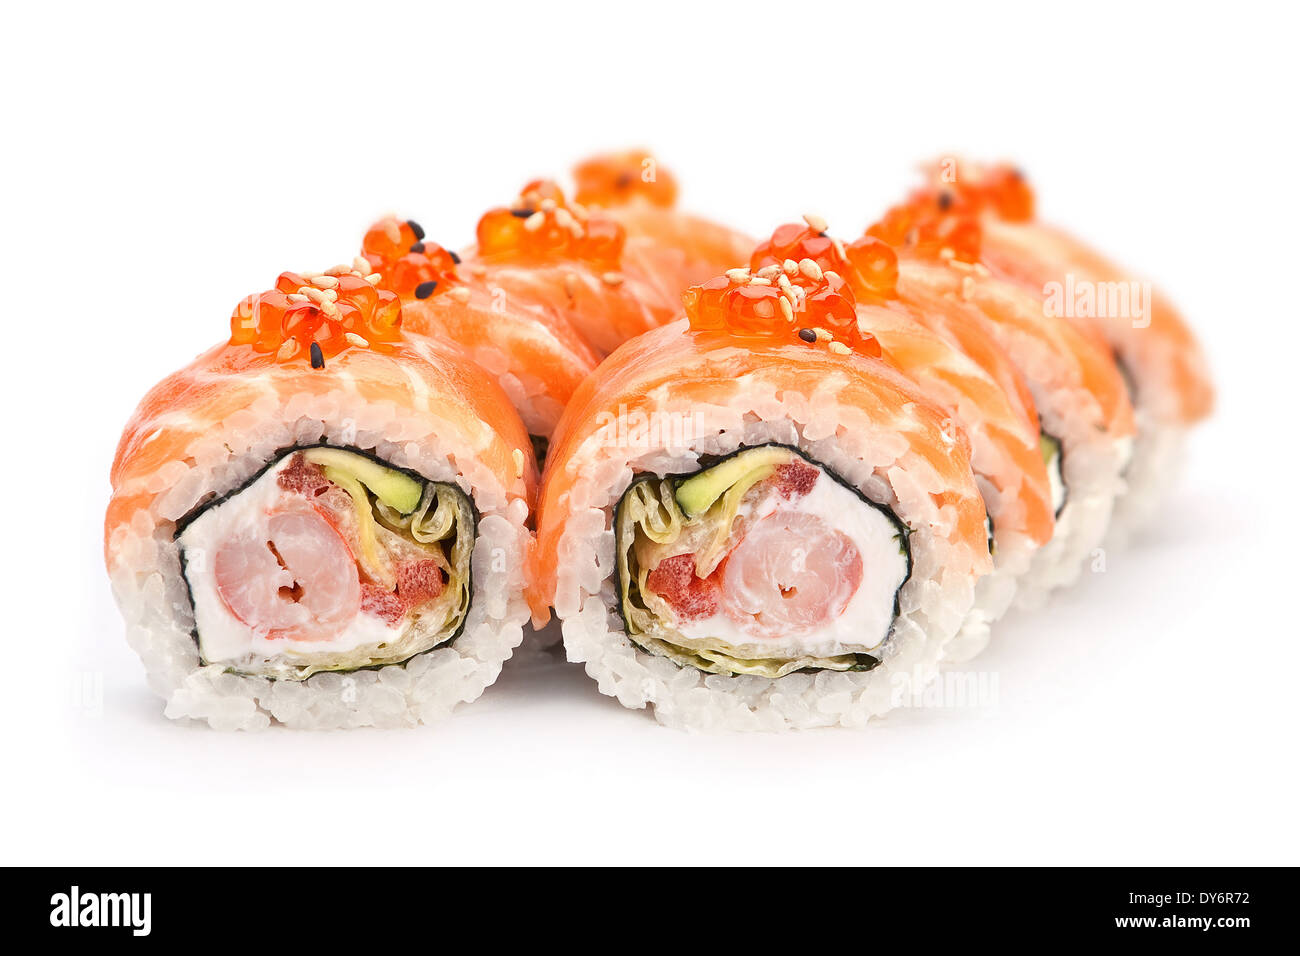 Japanese food roll with red fish and caviar Stock Photo